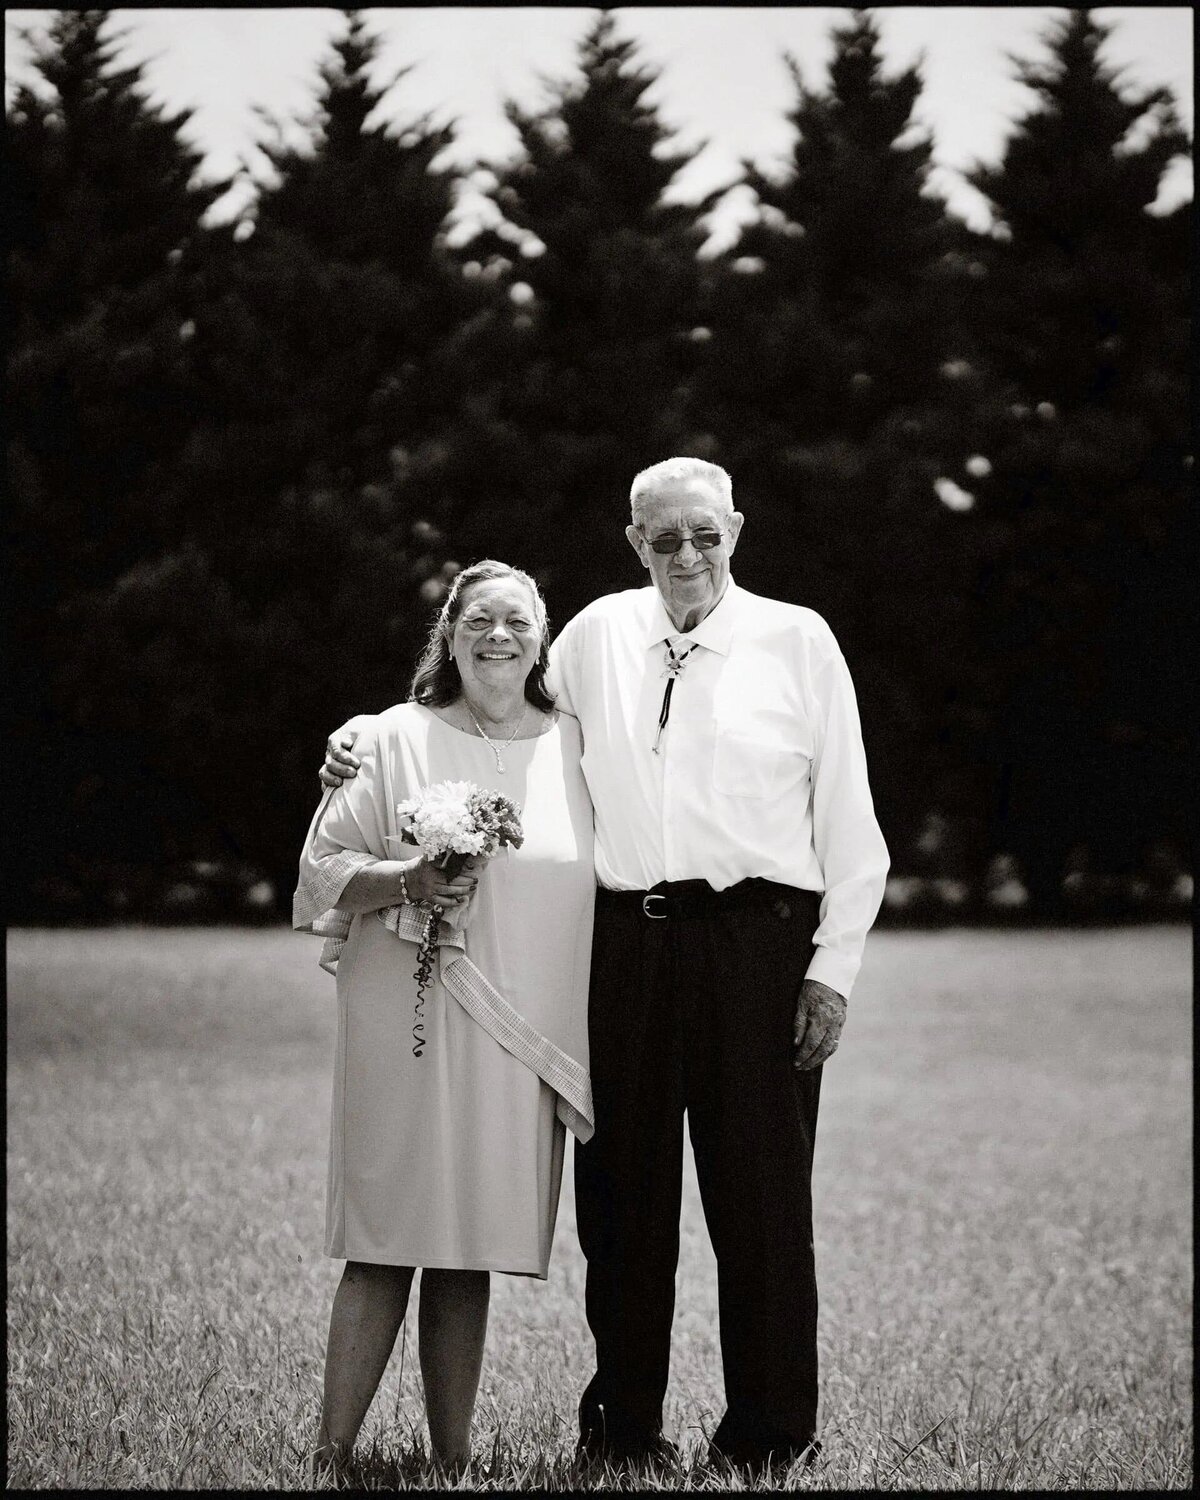 Elderly couple standing arm-in-arm in a field, with trees in the background